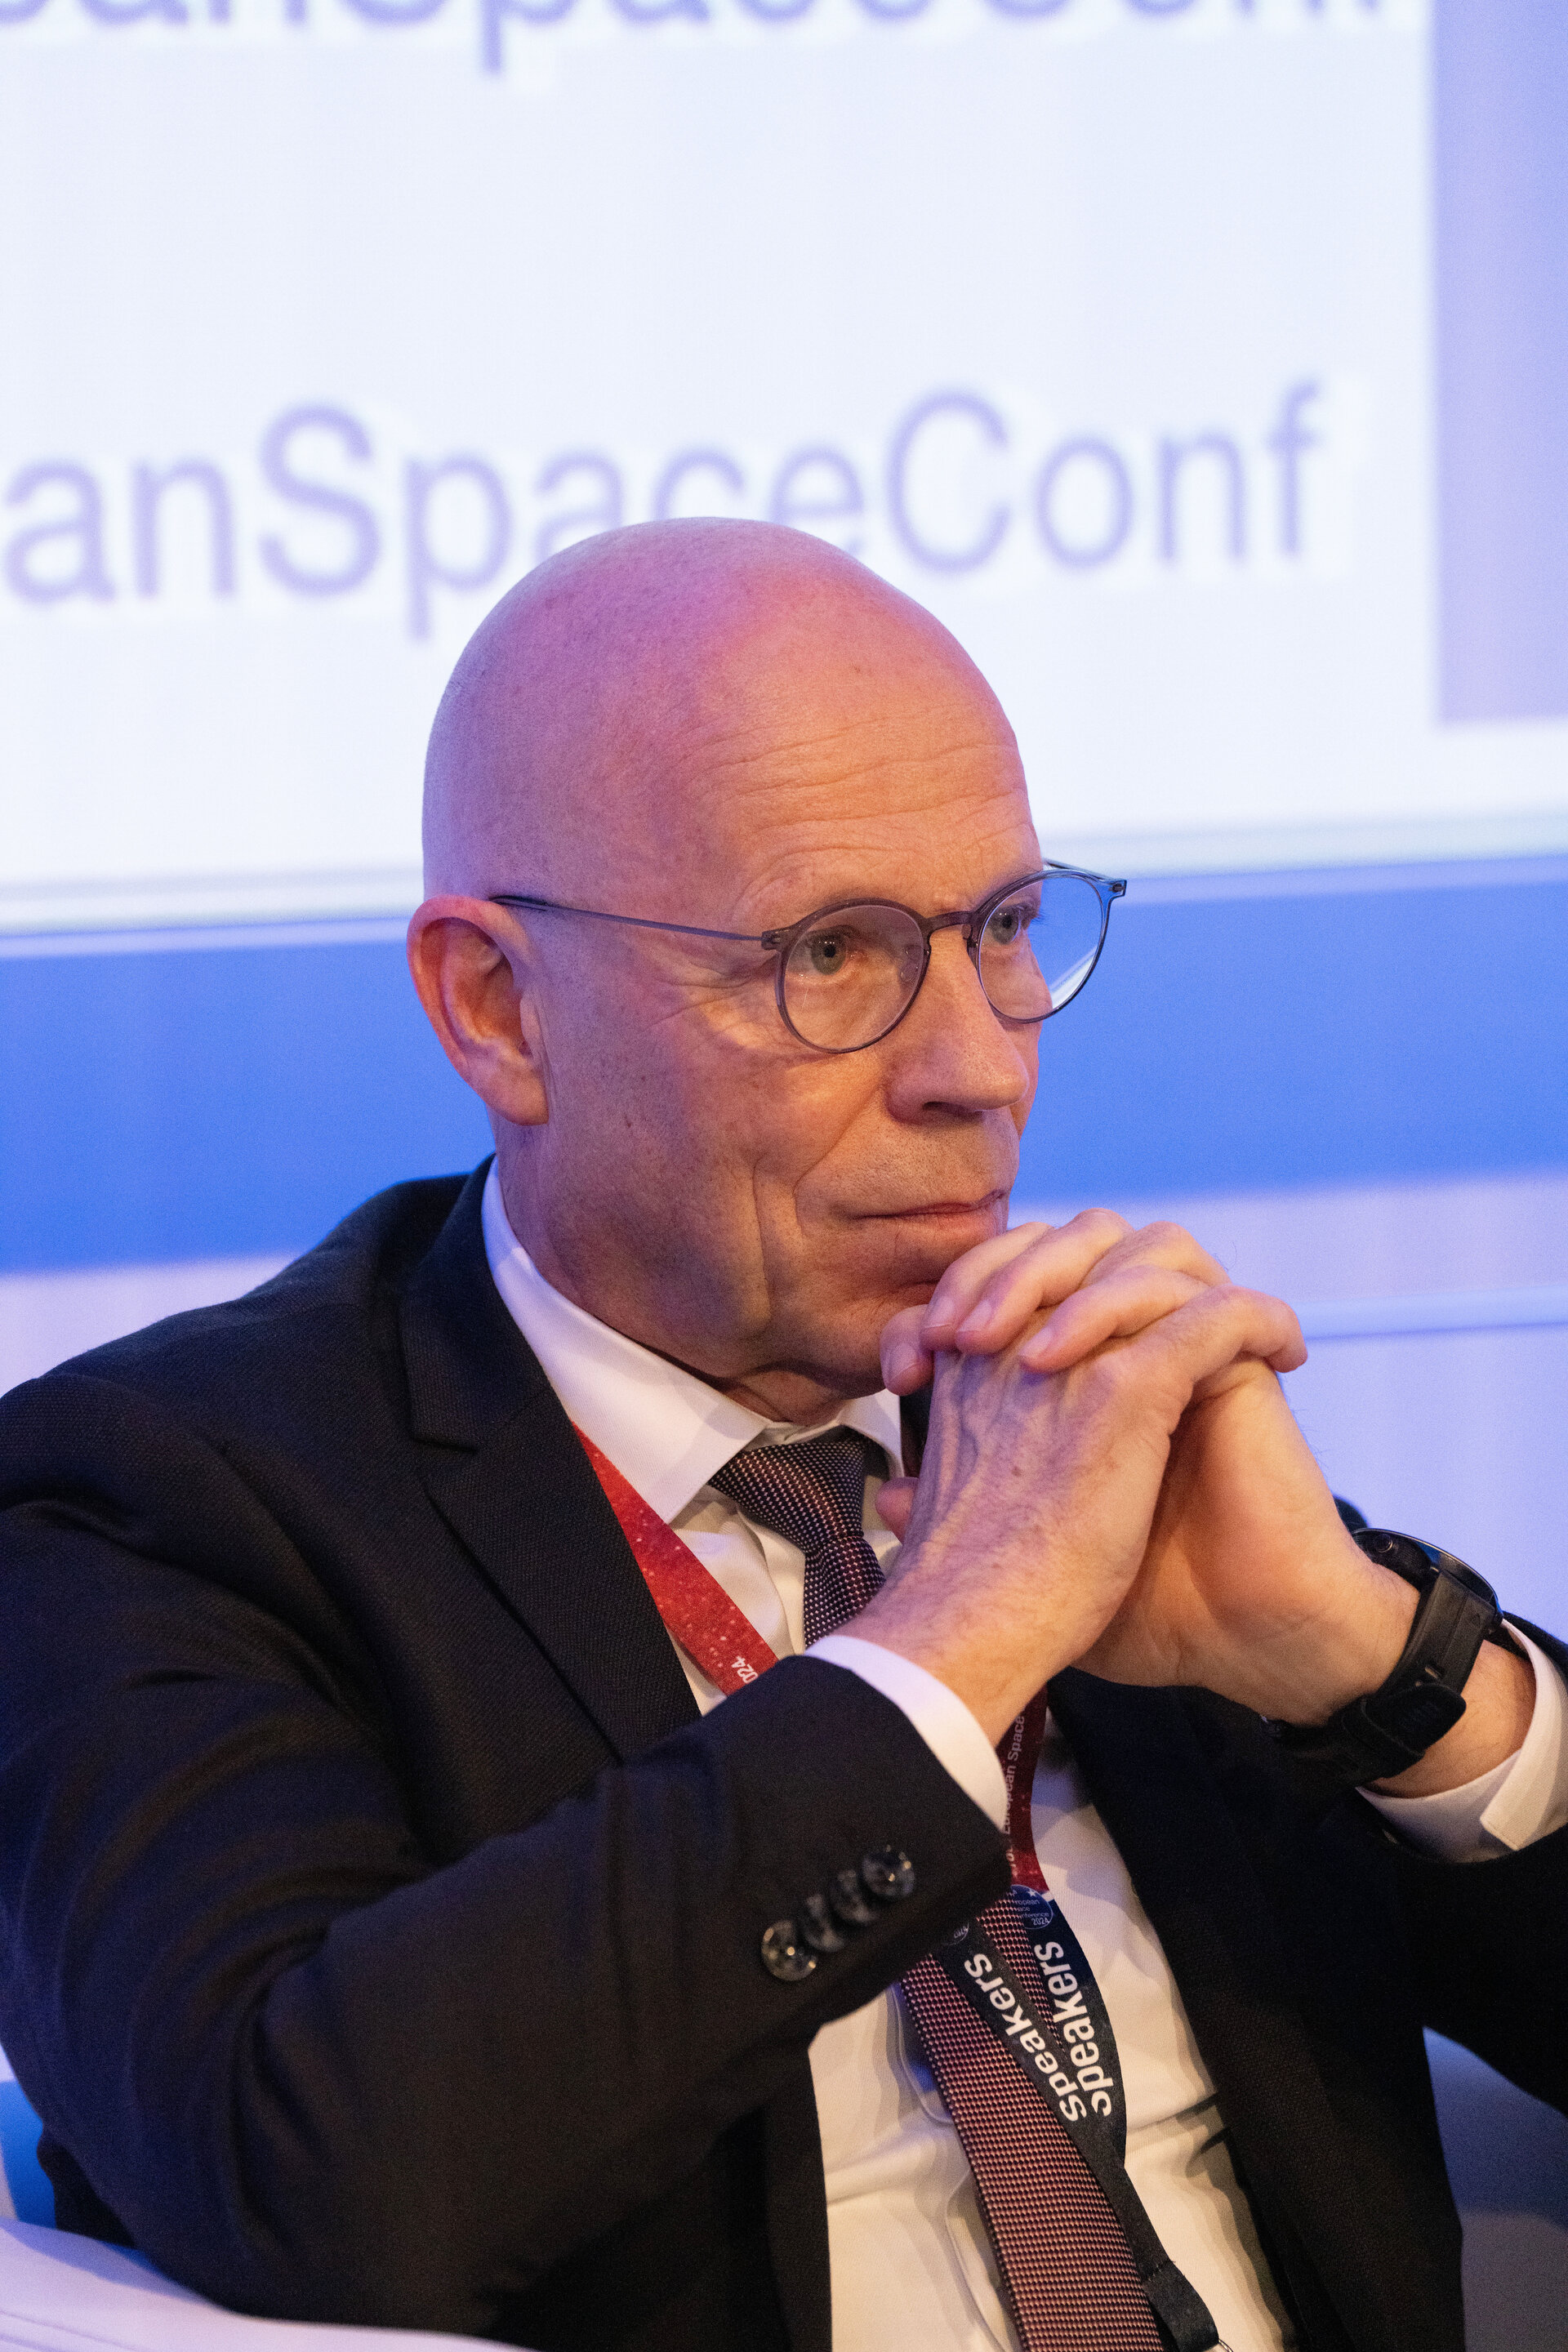 Rolf Densing, ESA Director of Operations, during the session "Uniting technical and political approaches towards a global sustainable use of outerspace through Space Traffic Management".